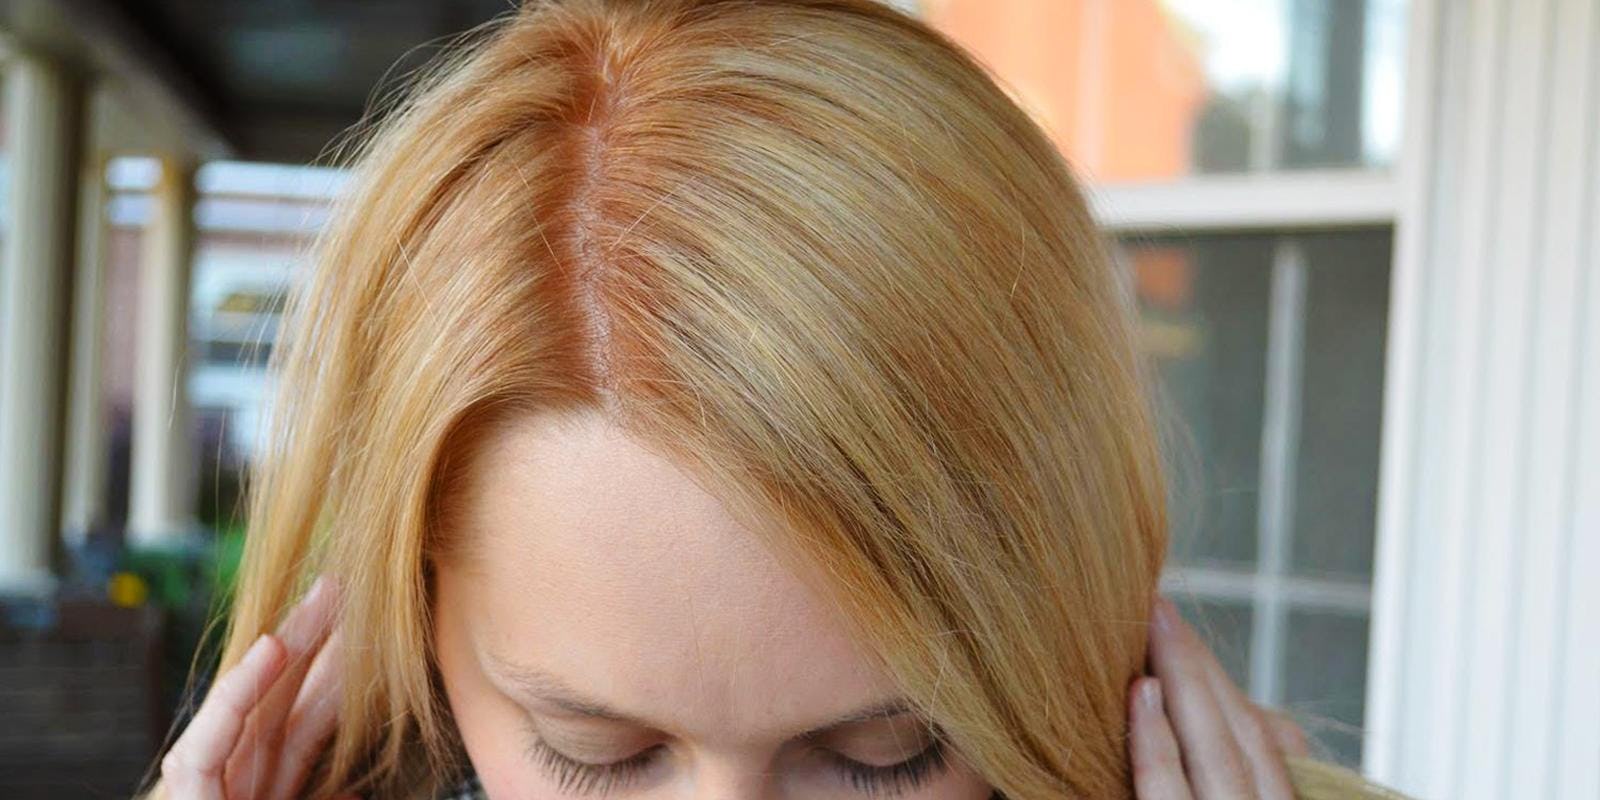 How to Get Rid of Orange Tones After Dyeing Hair at Home | Makeup.com